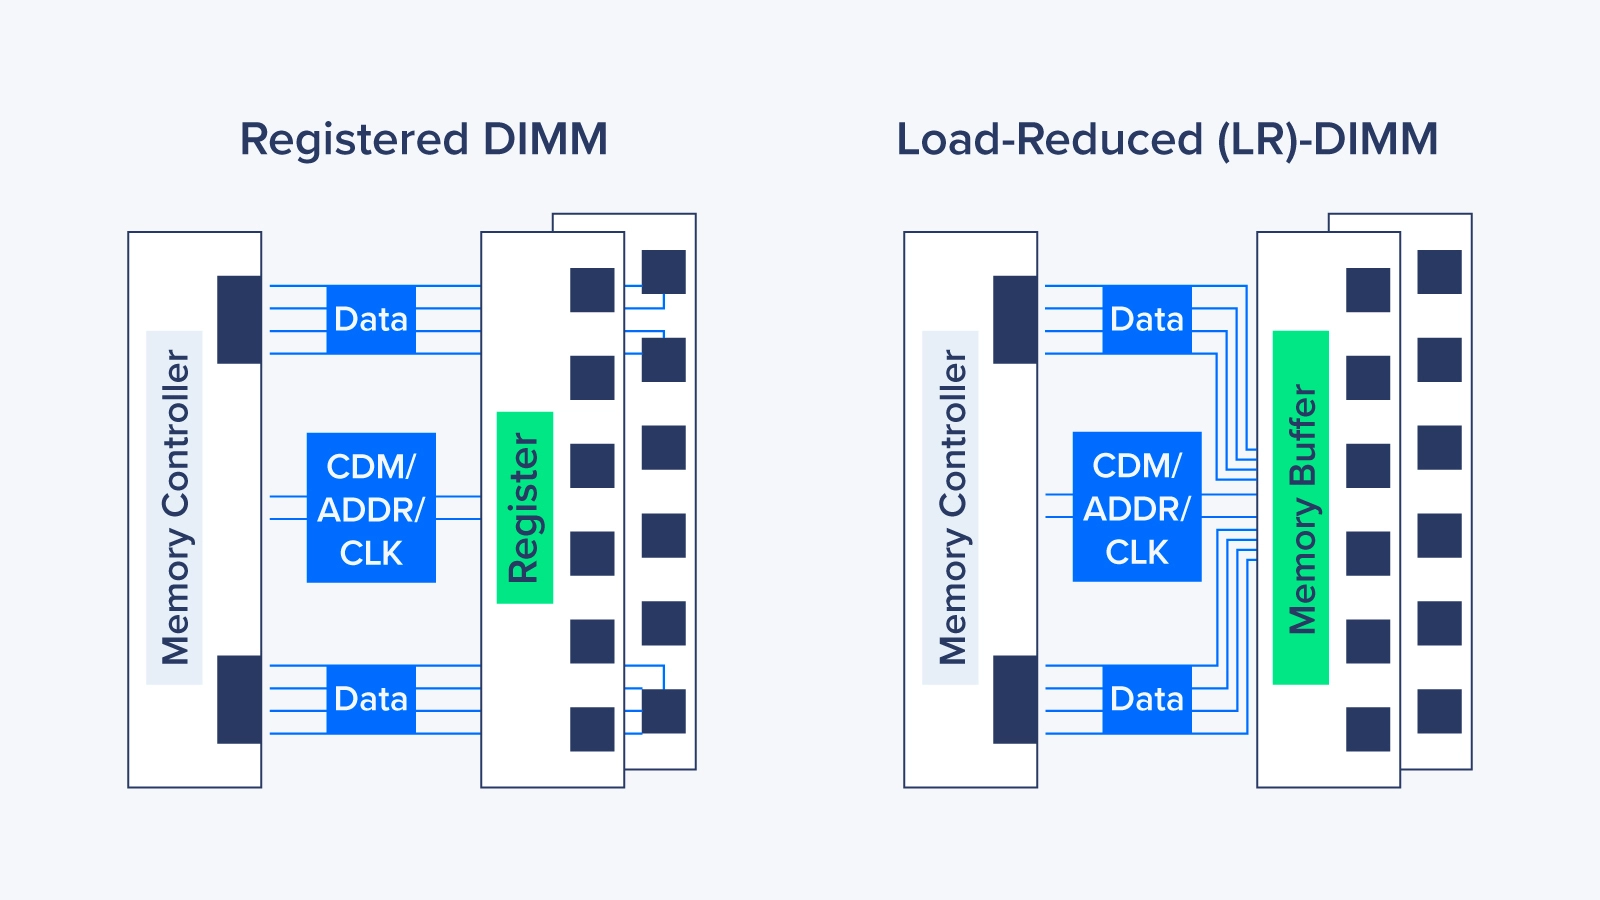 difference between rdimm and lrdimm